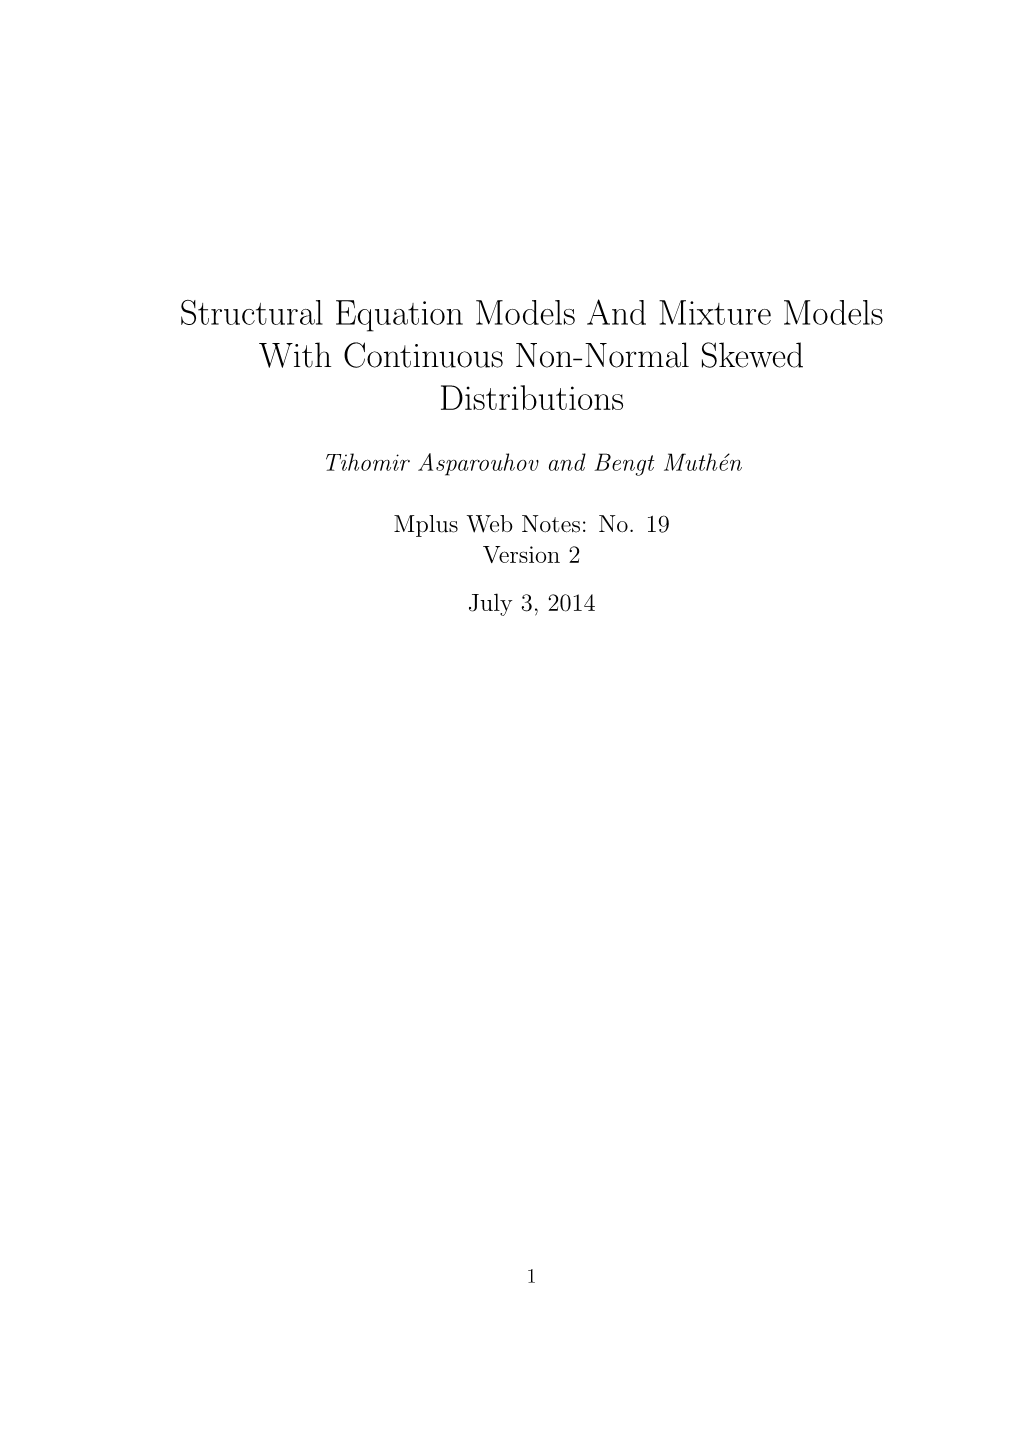 Structural Equation Models and Mixture Models with Continuous Non-Normal Skewed Distributions